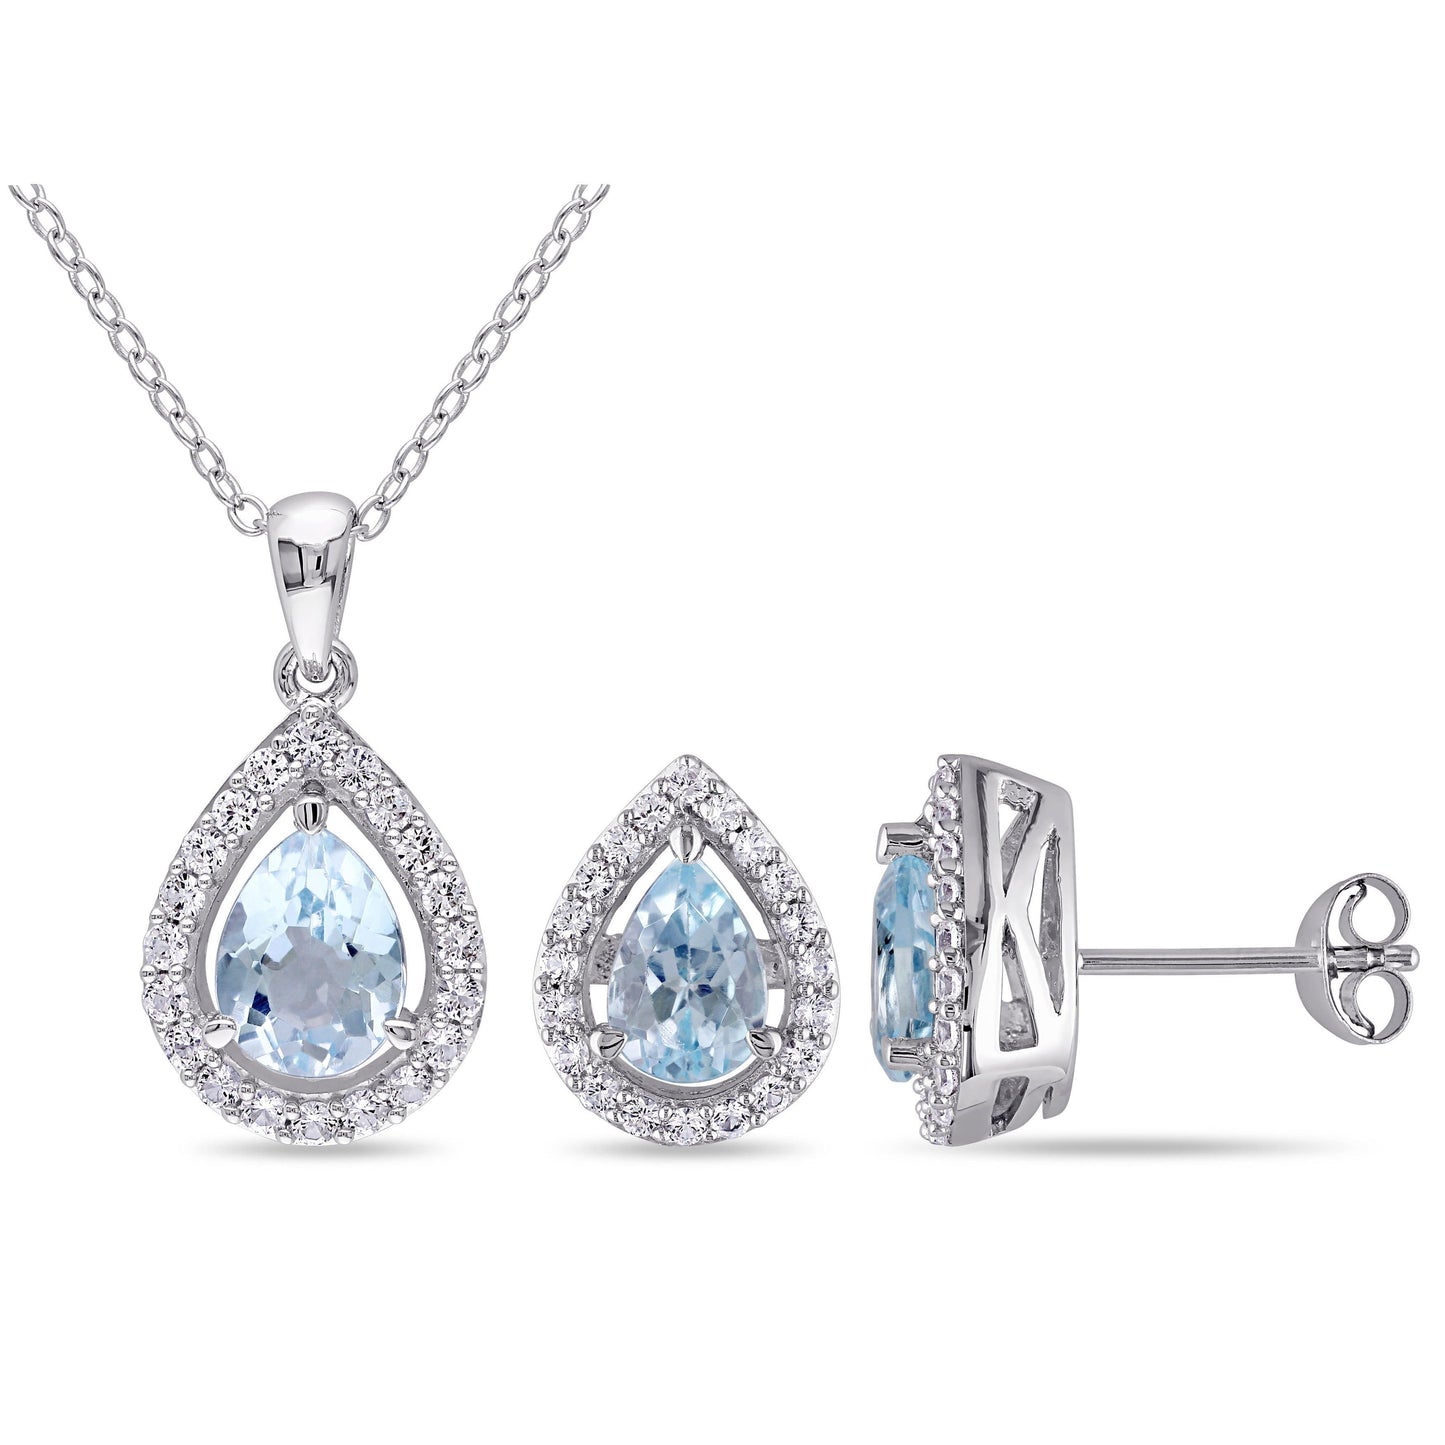 Blue Topaz & White Sapphire Set in Sterling Silver